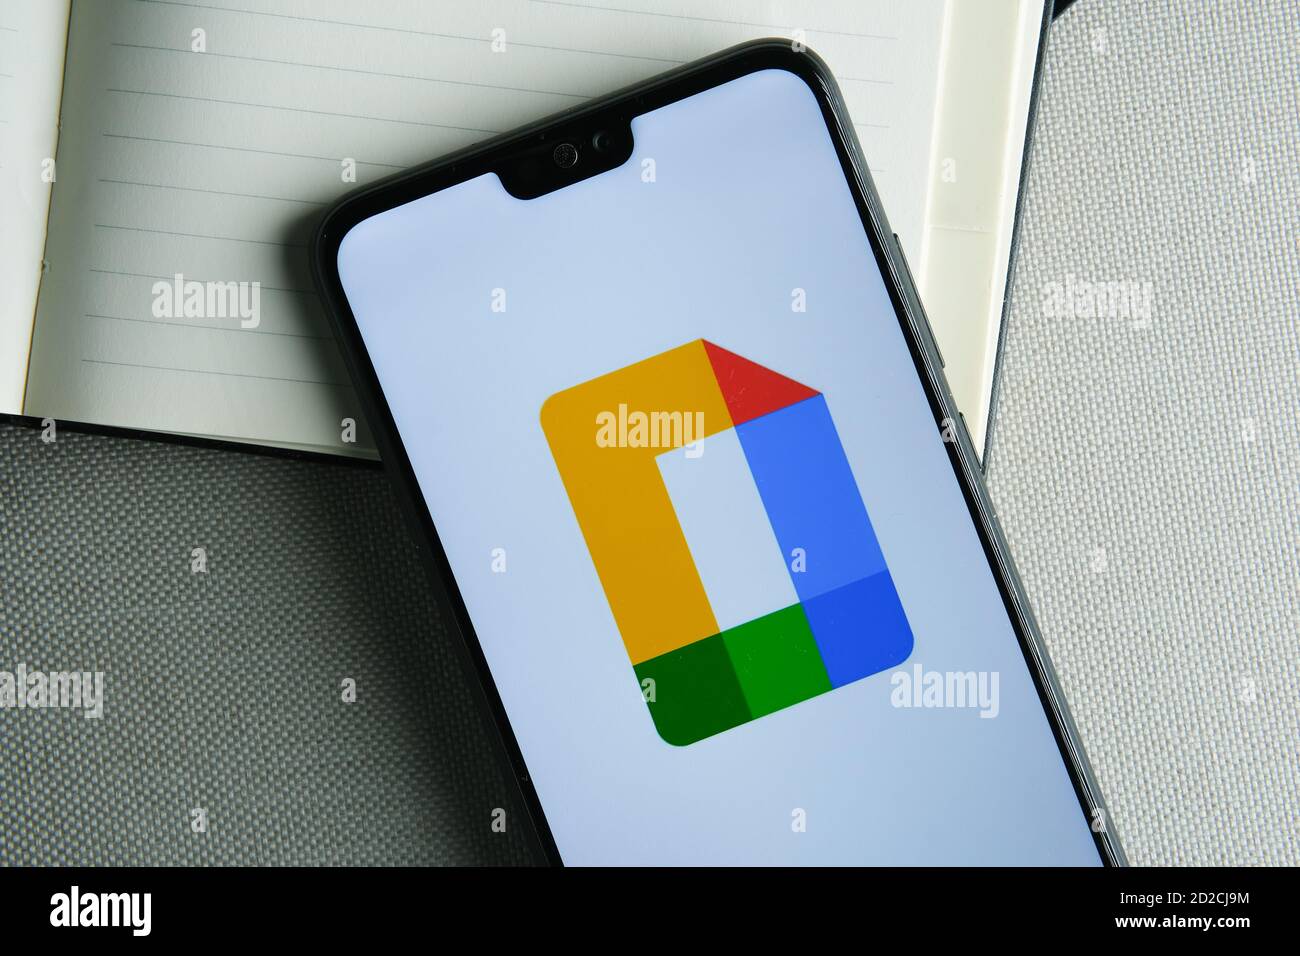 Stafford / United Kingdom - October 6 2020: New rebranded Google Docs logo seen on the screen of the smartphone. Stock Photo